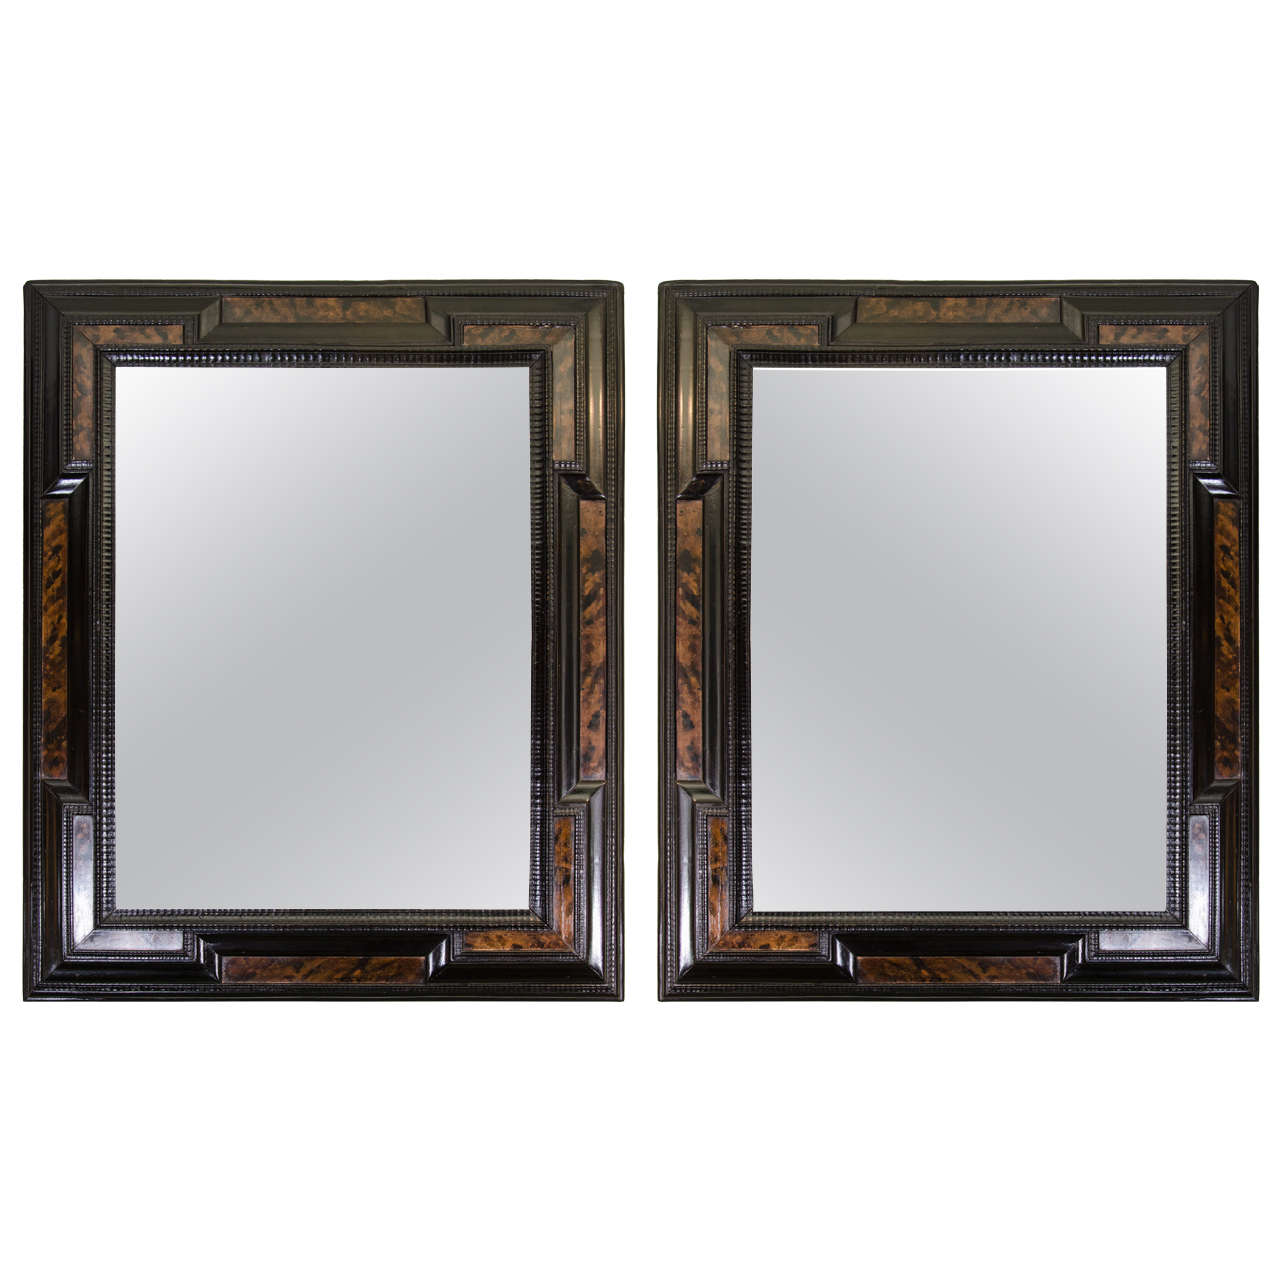 Pair of Baroque Faux Tortoise Mirrors